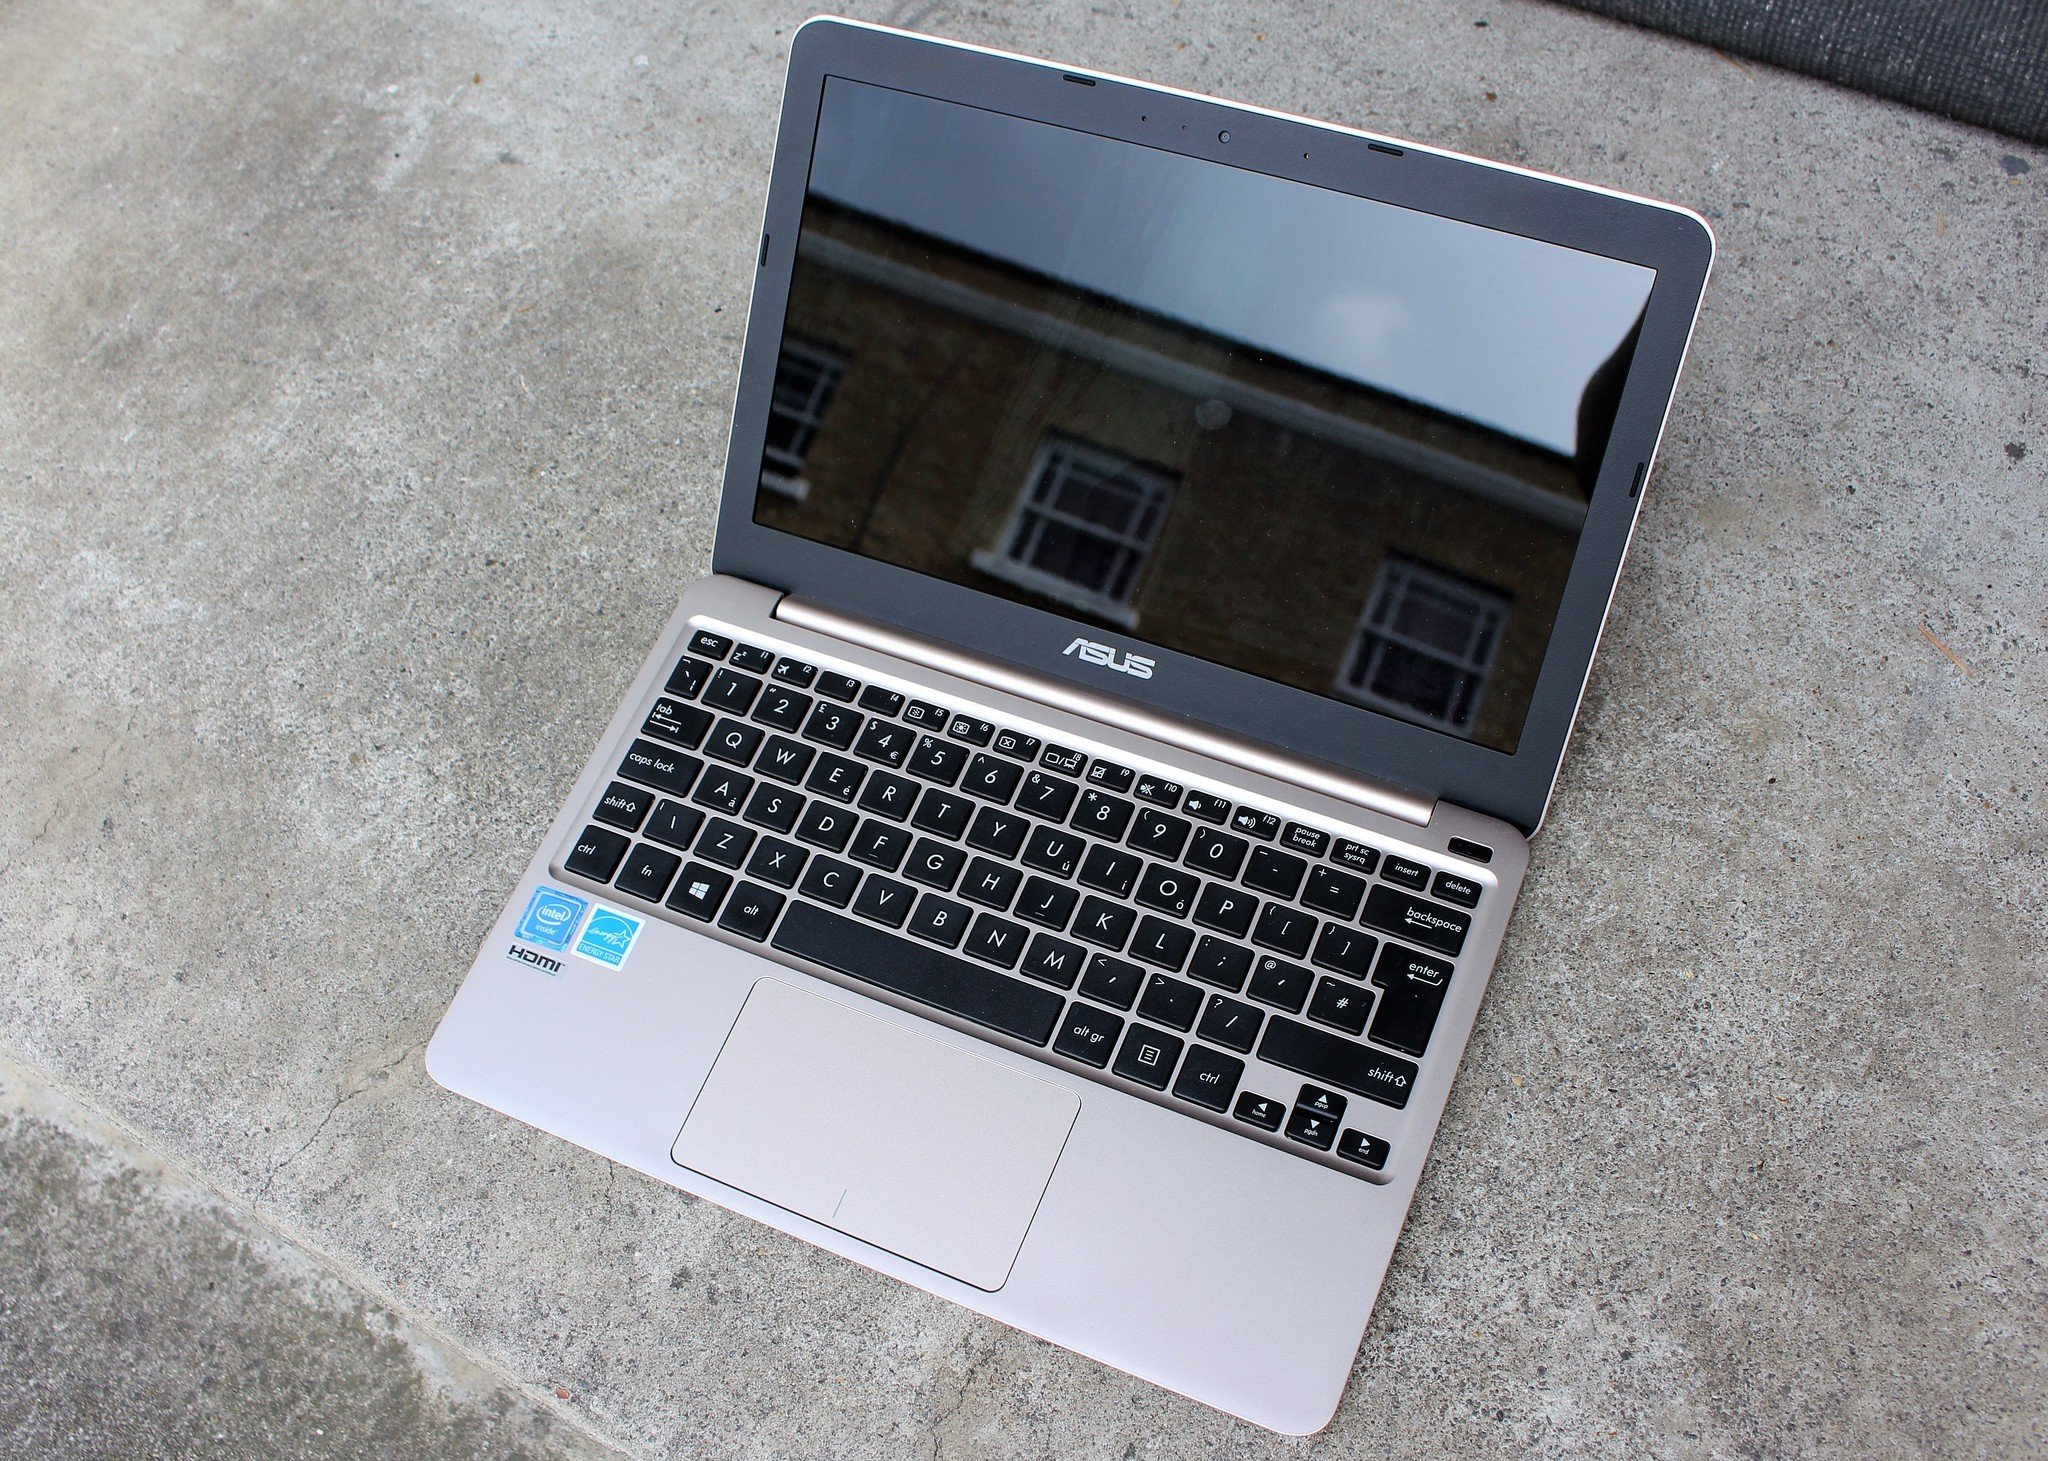 ASUS E200HA review: The best-looking $200 laptop available | Windows